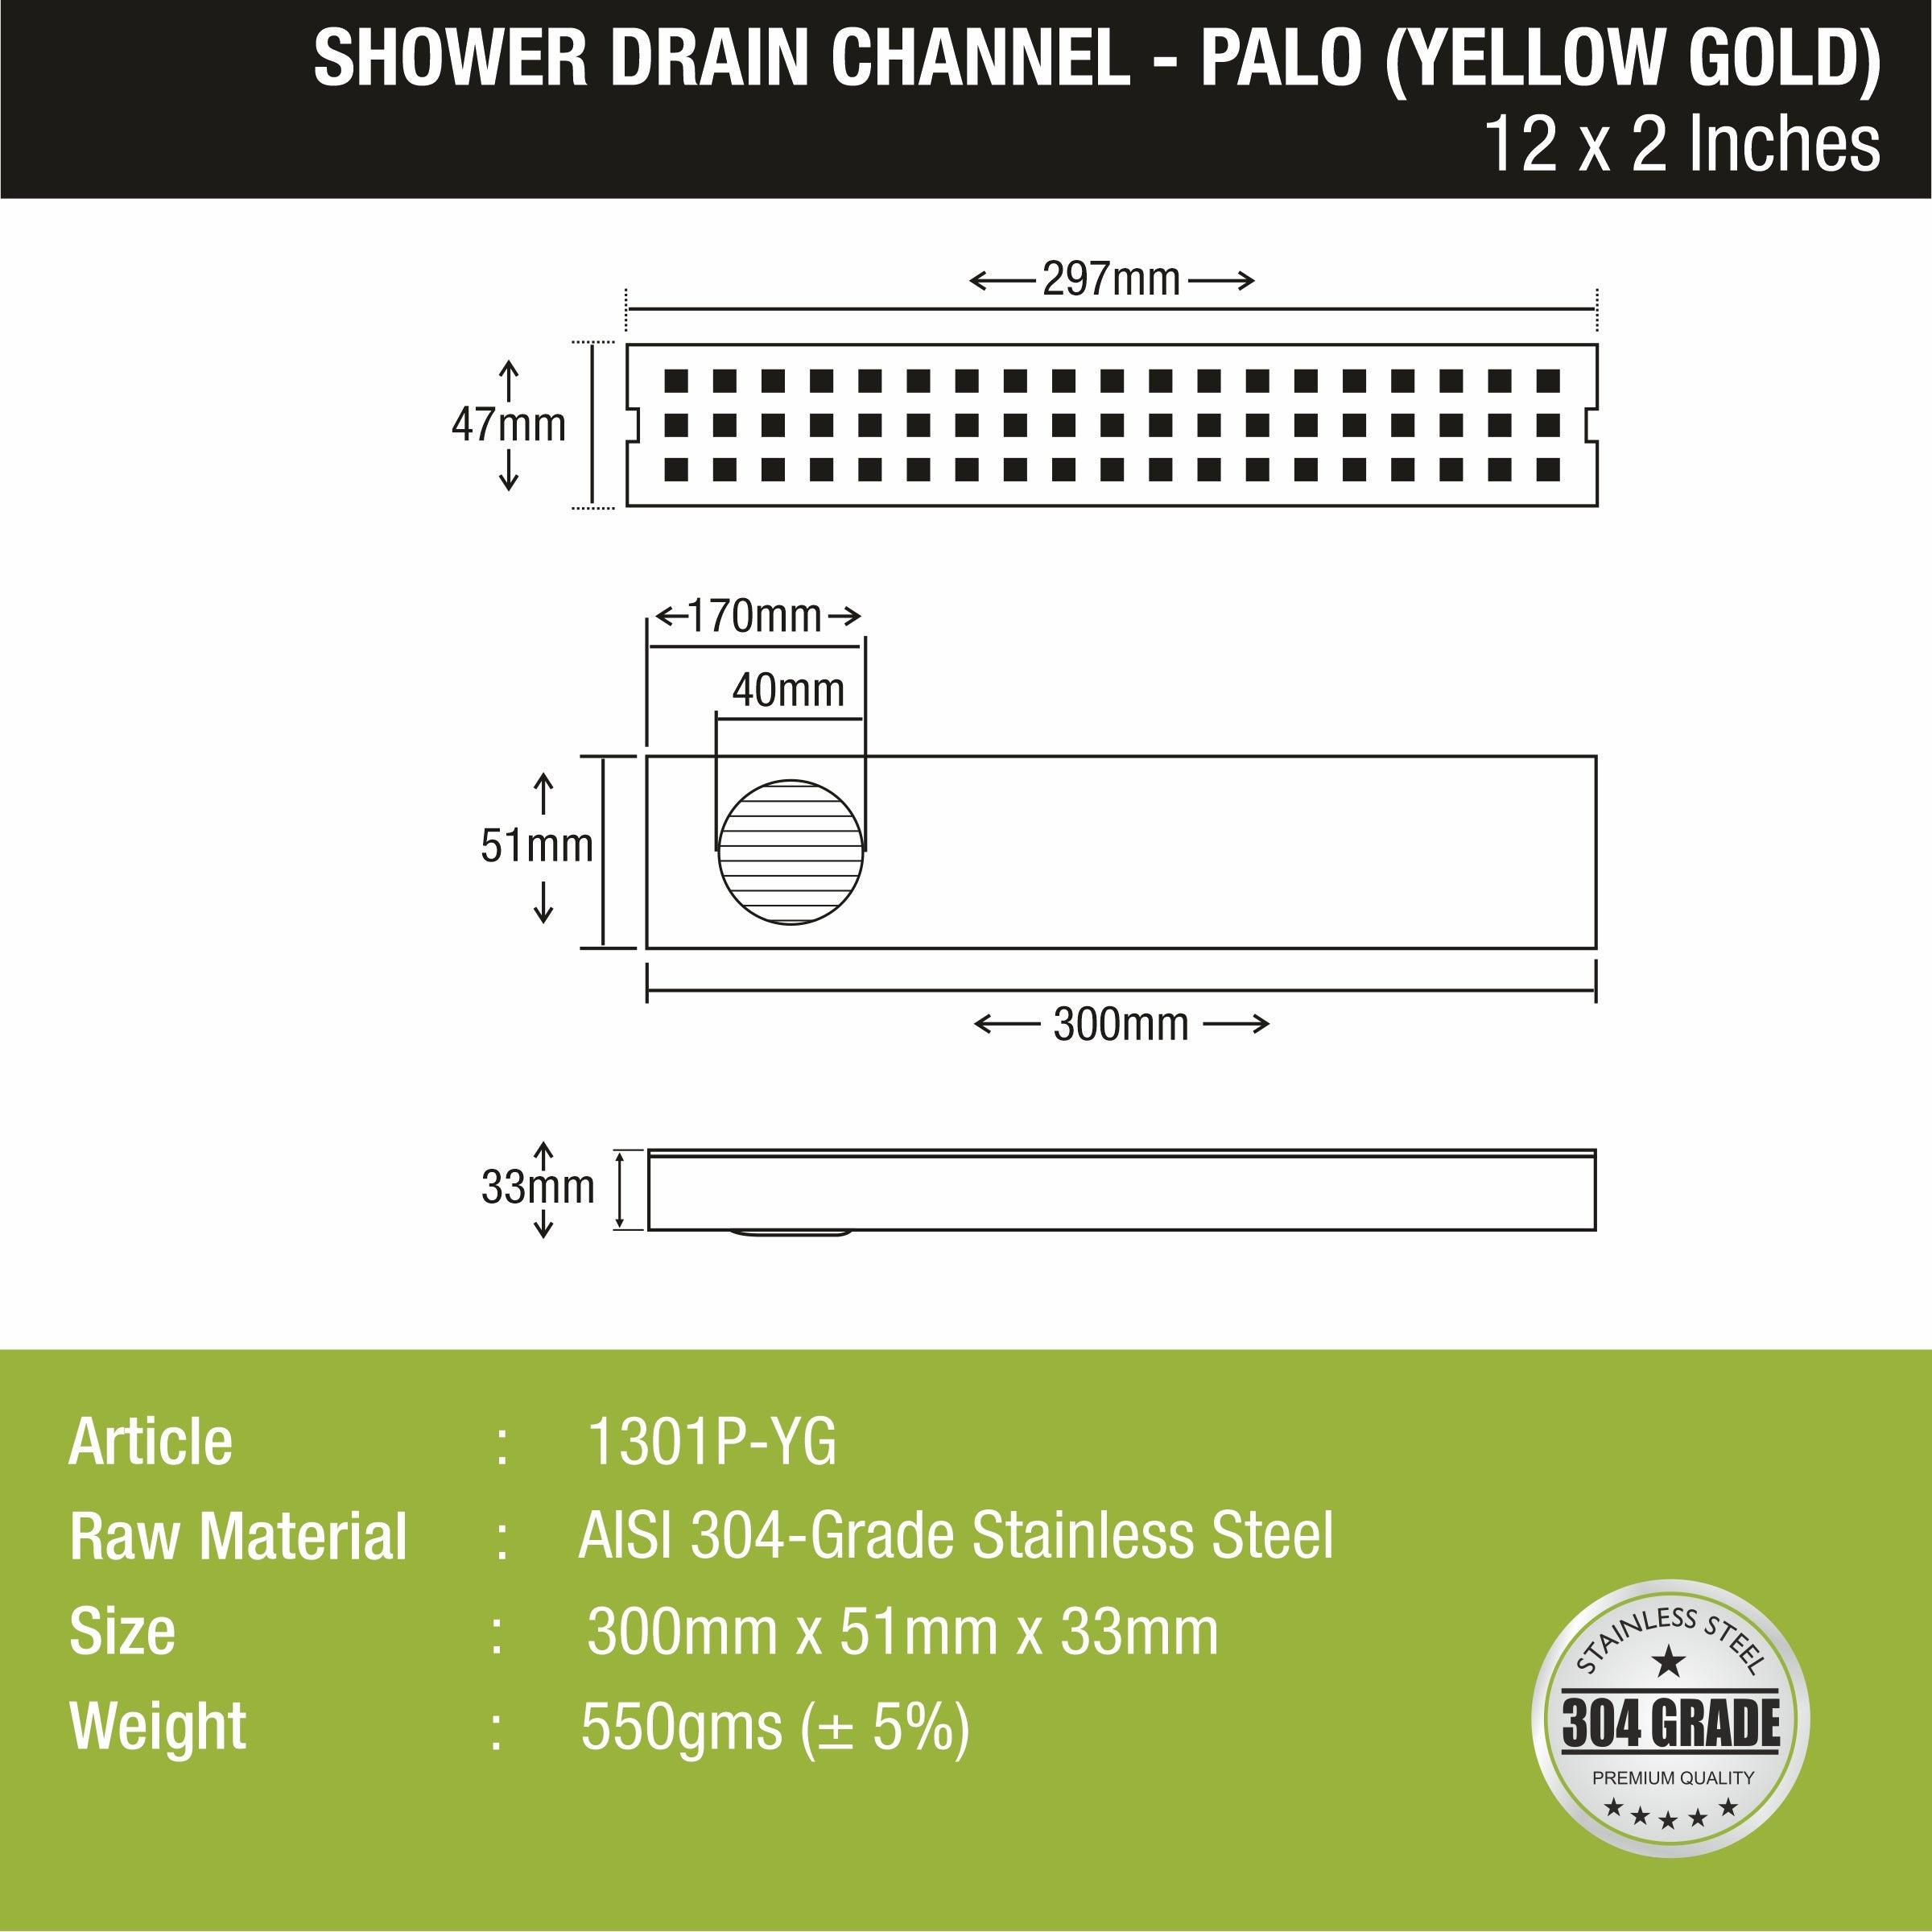 Palo Shower Drain Channel - Yellow Gold (12 x 2 Inches) sizes and dimensions